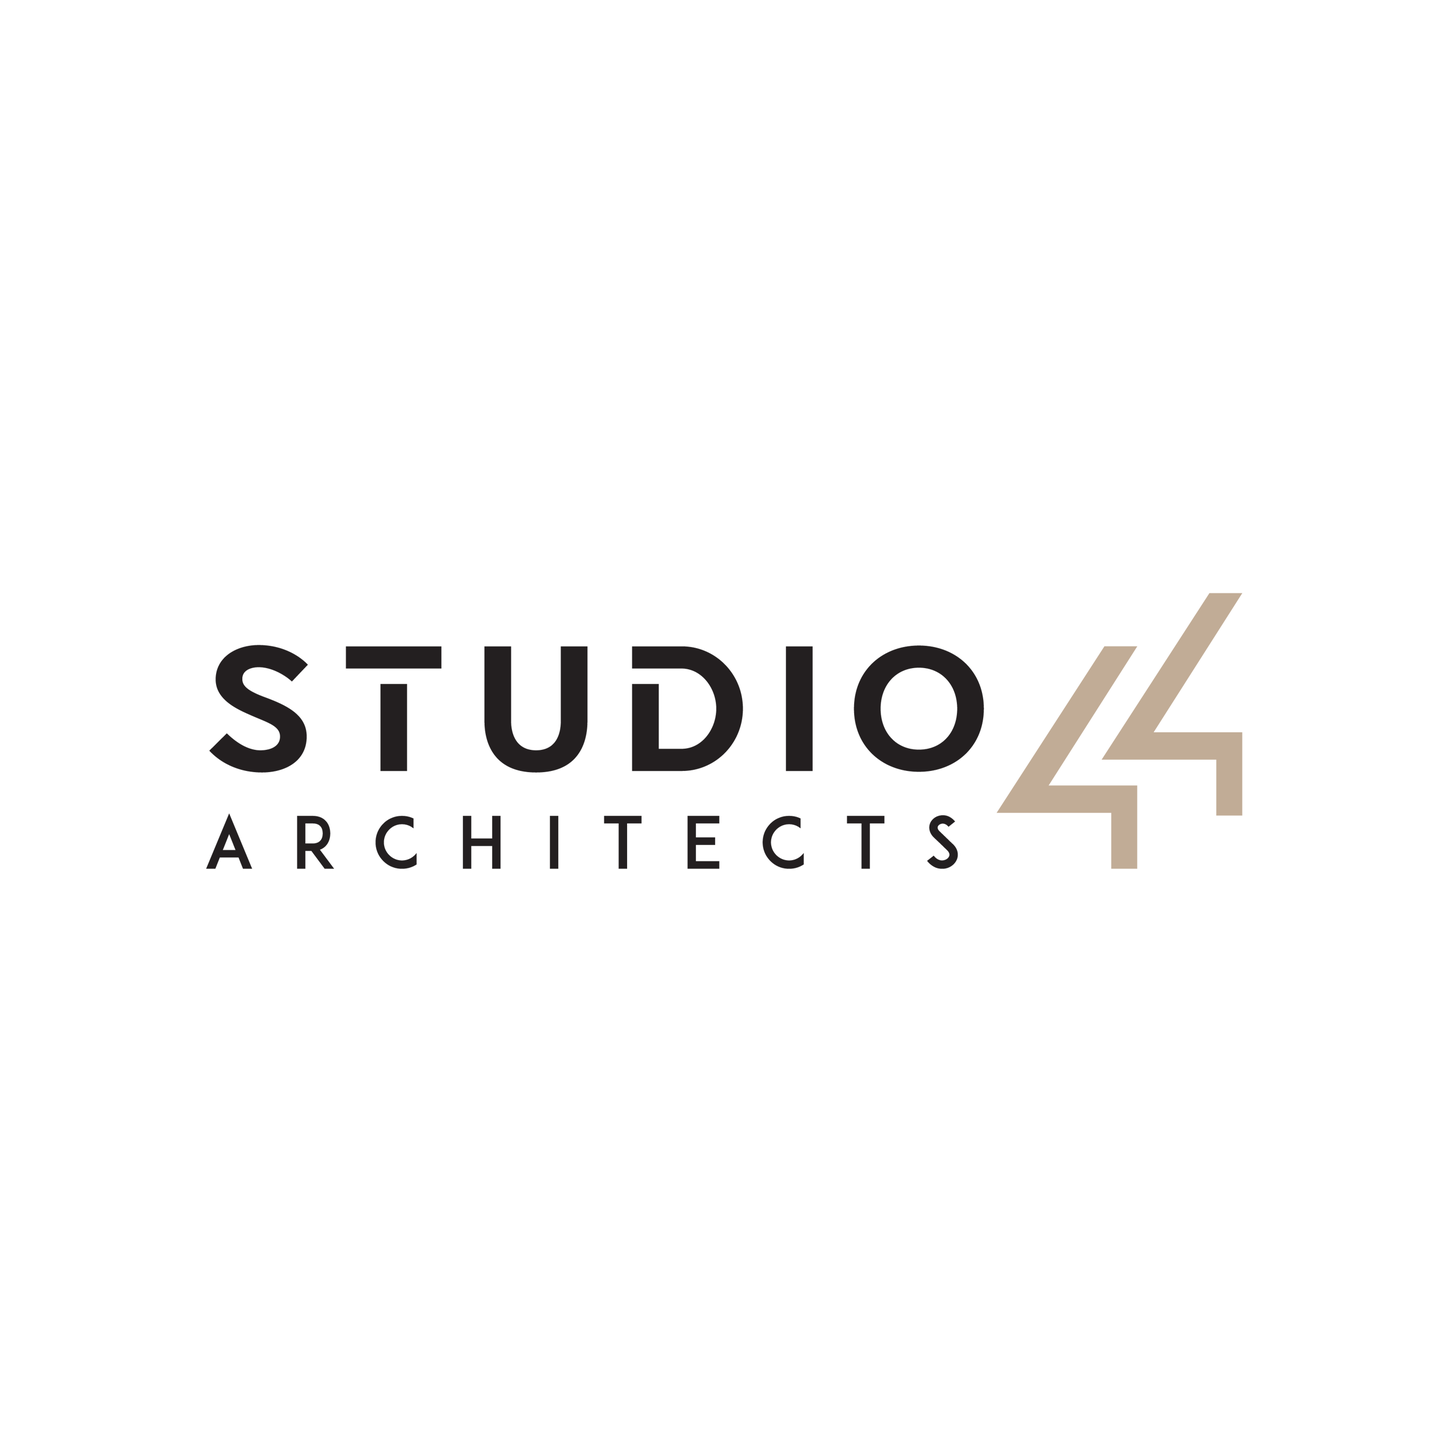 Studio44 Architects|Legal Services|Professional Services